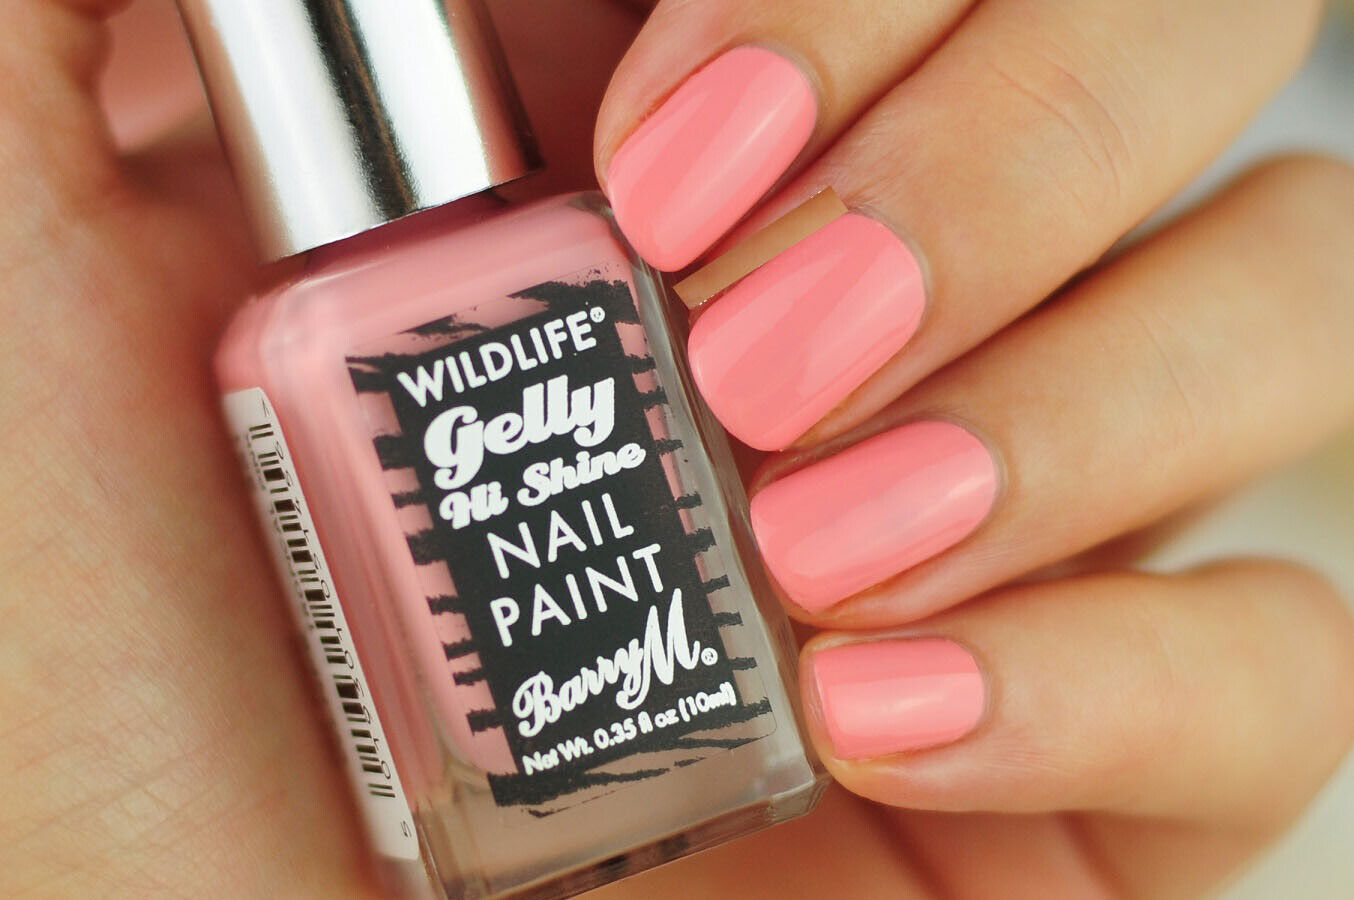 Barry M Wildlife Gelly Hi Shine Nail Paint Tropical Pink